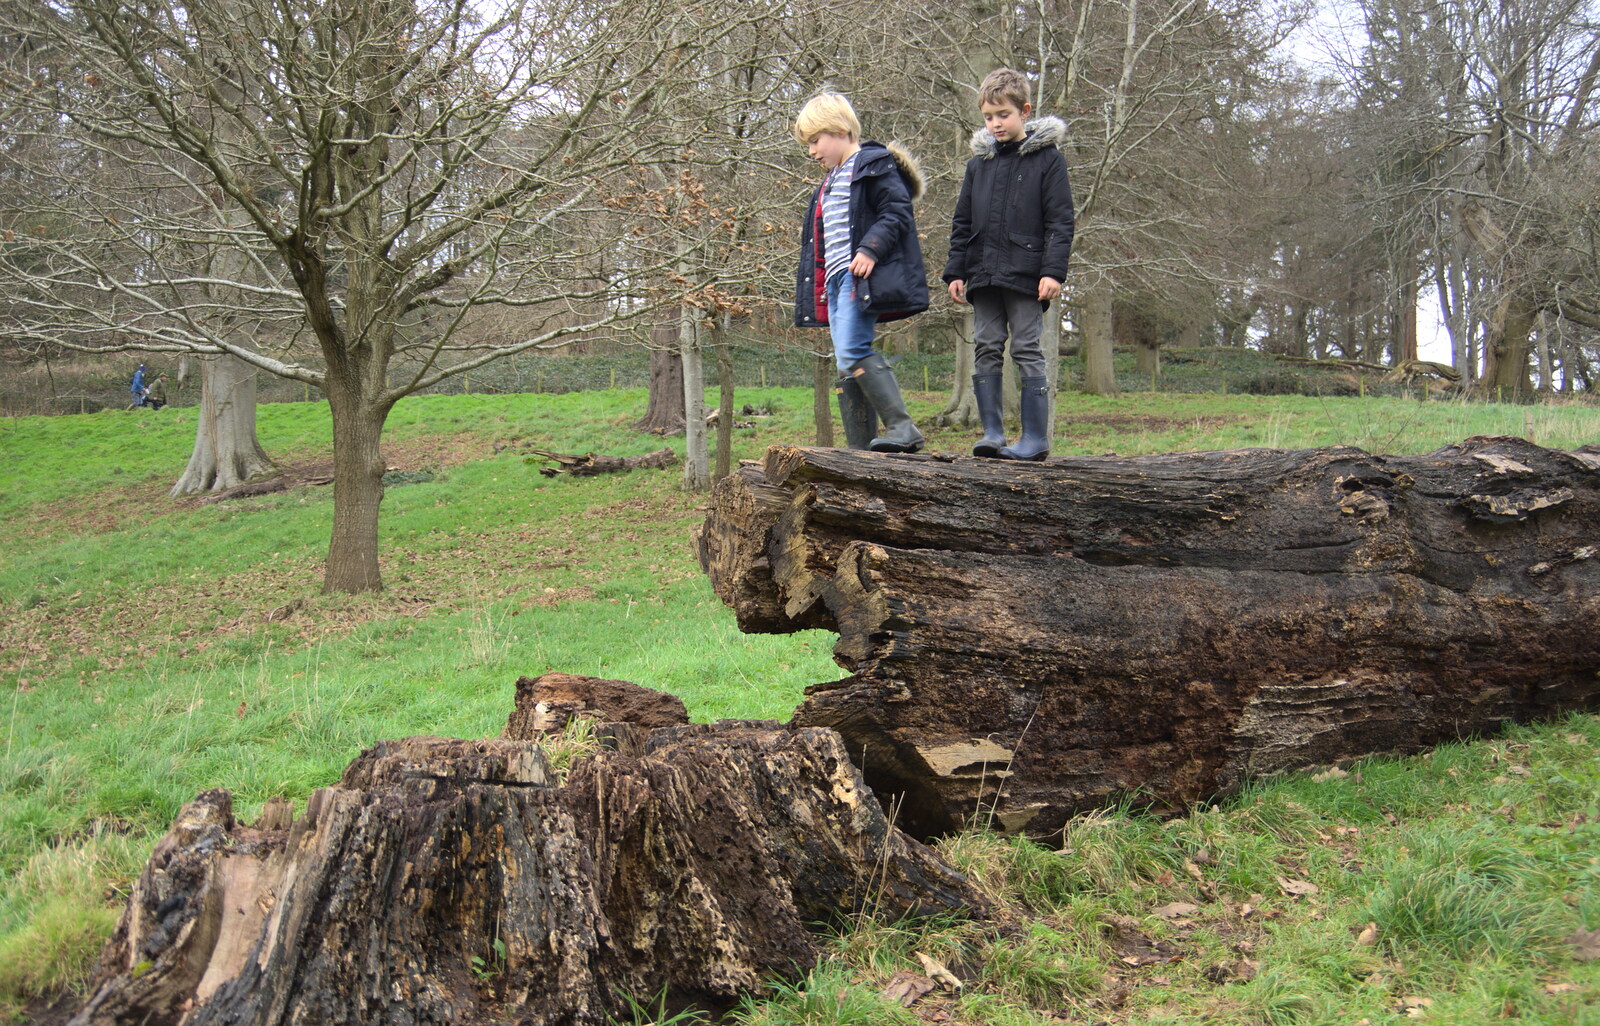 The boys are perched on a fallen tree from Killerton House, Broadclyst, Devon - 30th December 2017